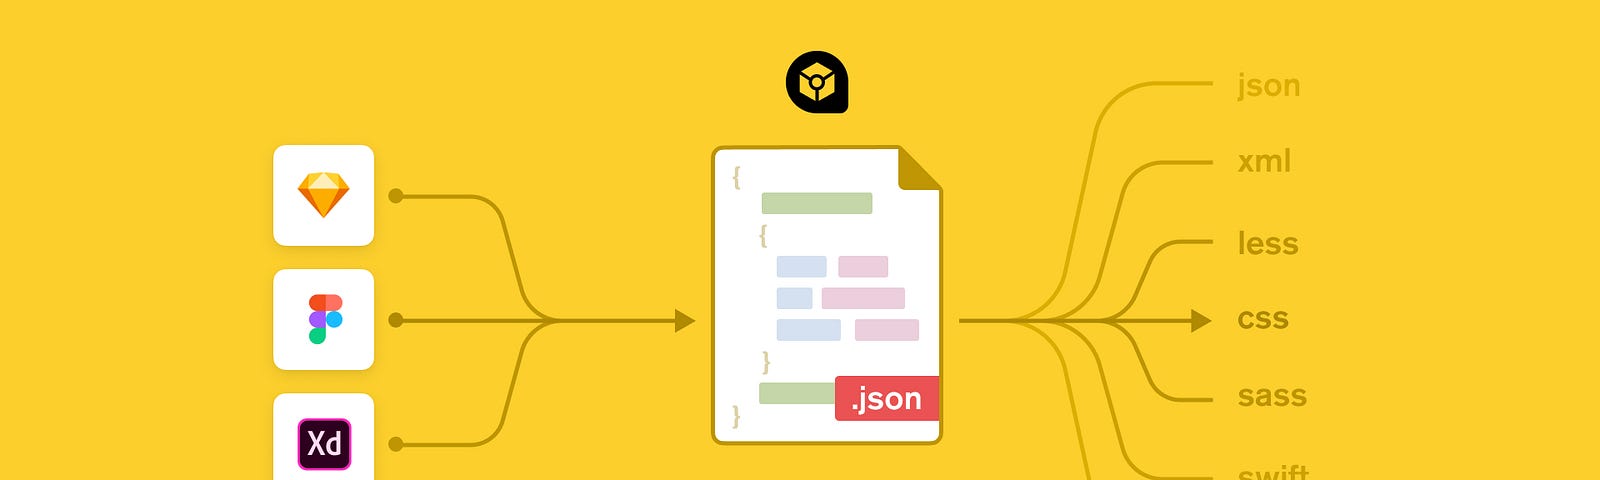 Illustration showing how to get design knowledge as tokens from a design tool to json and from there to any coding language.